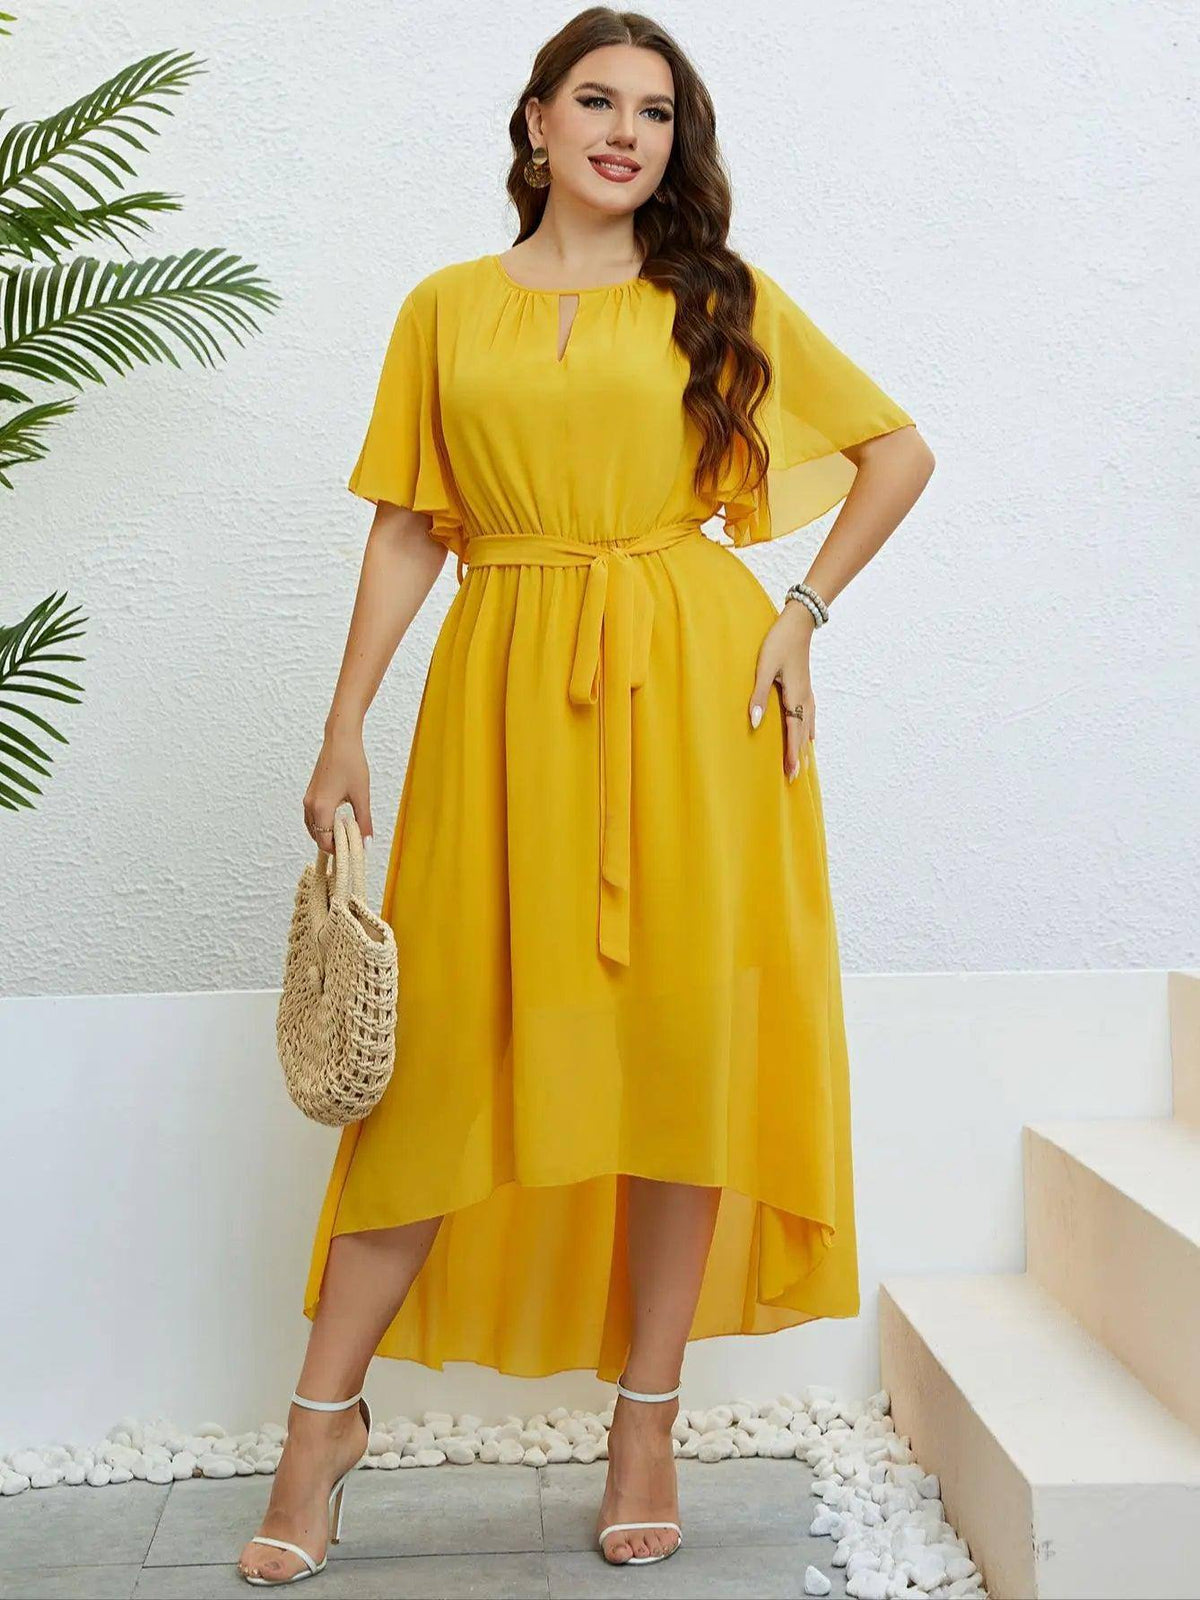 Chiffon Party Dresses For Women Plus Size Summer Solid Color-Yellow-7